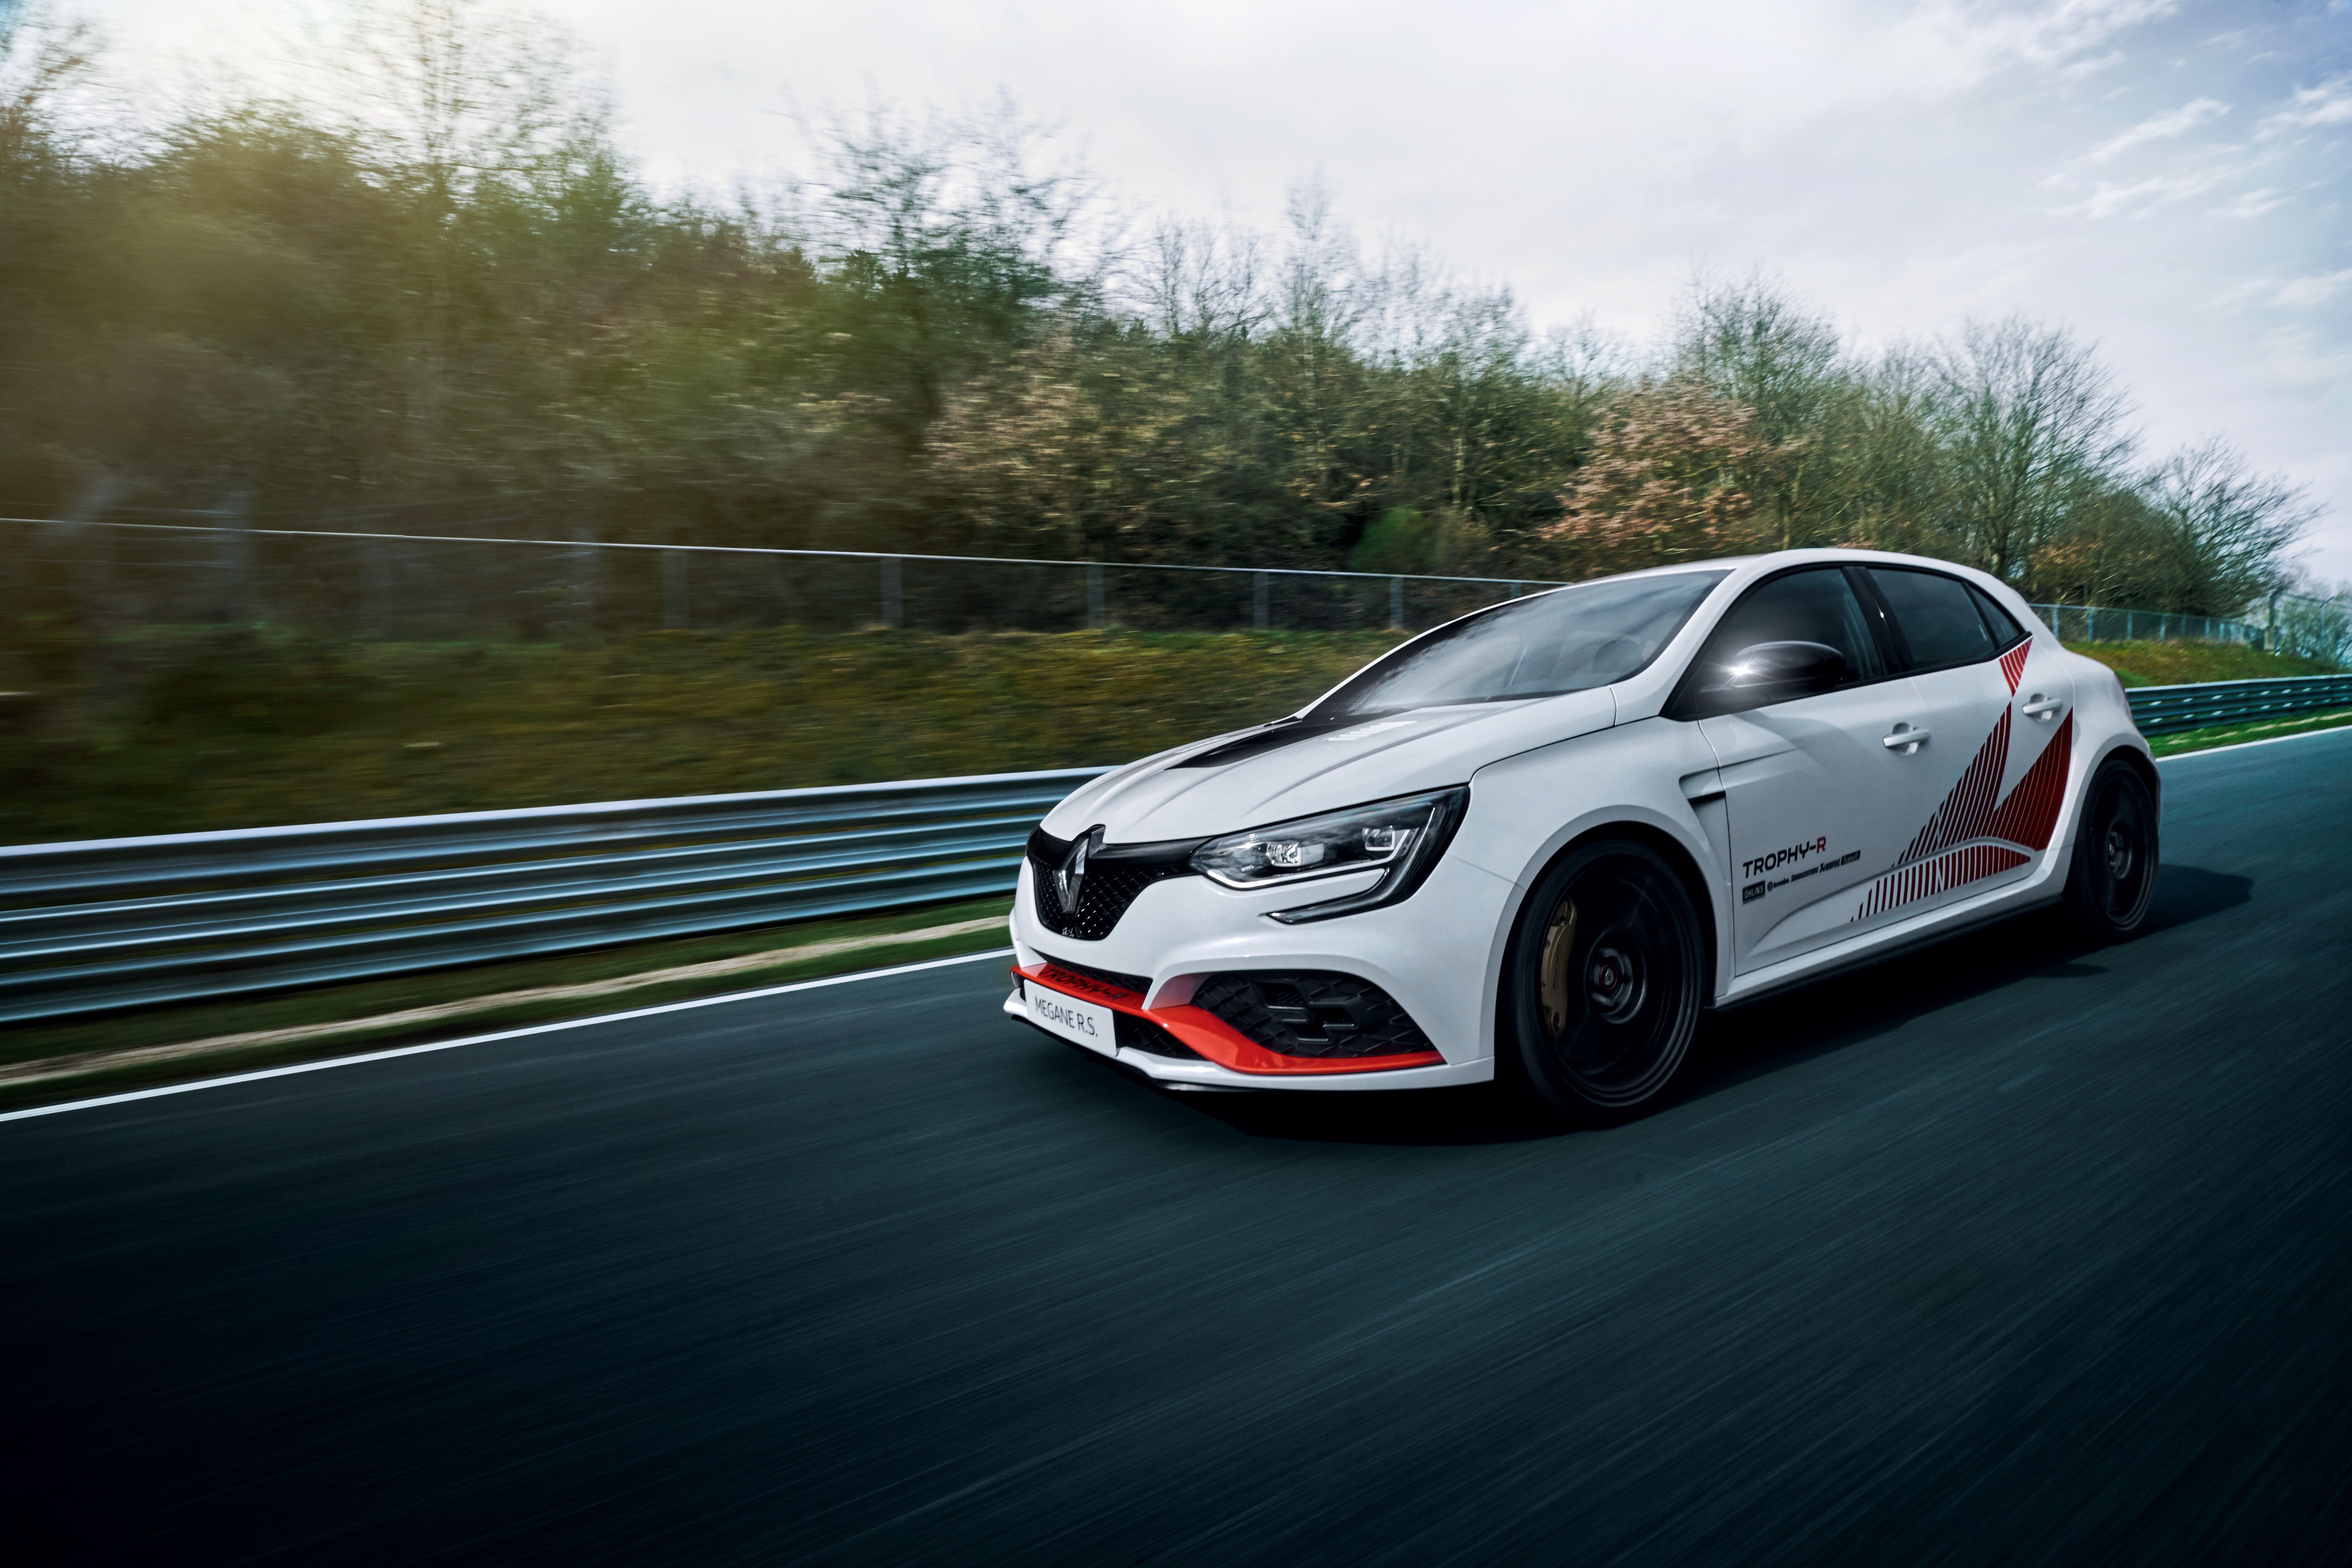 Wallpaper Of The Day: 2019 Renault Megane R.S. Trophy R Picture, Photo, Wallpaper